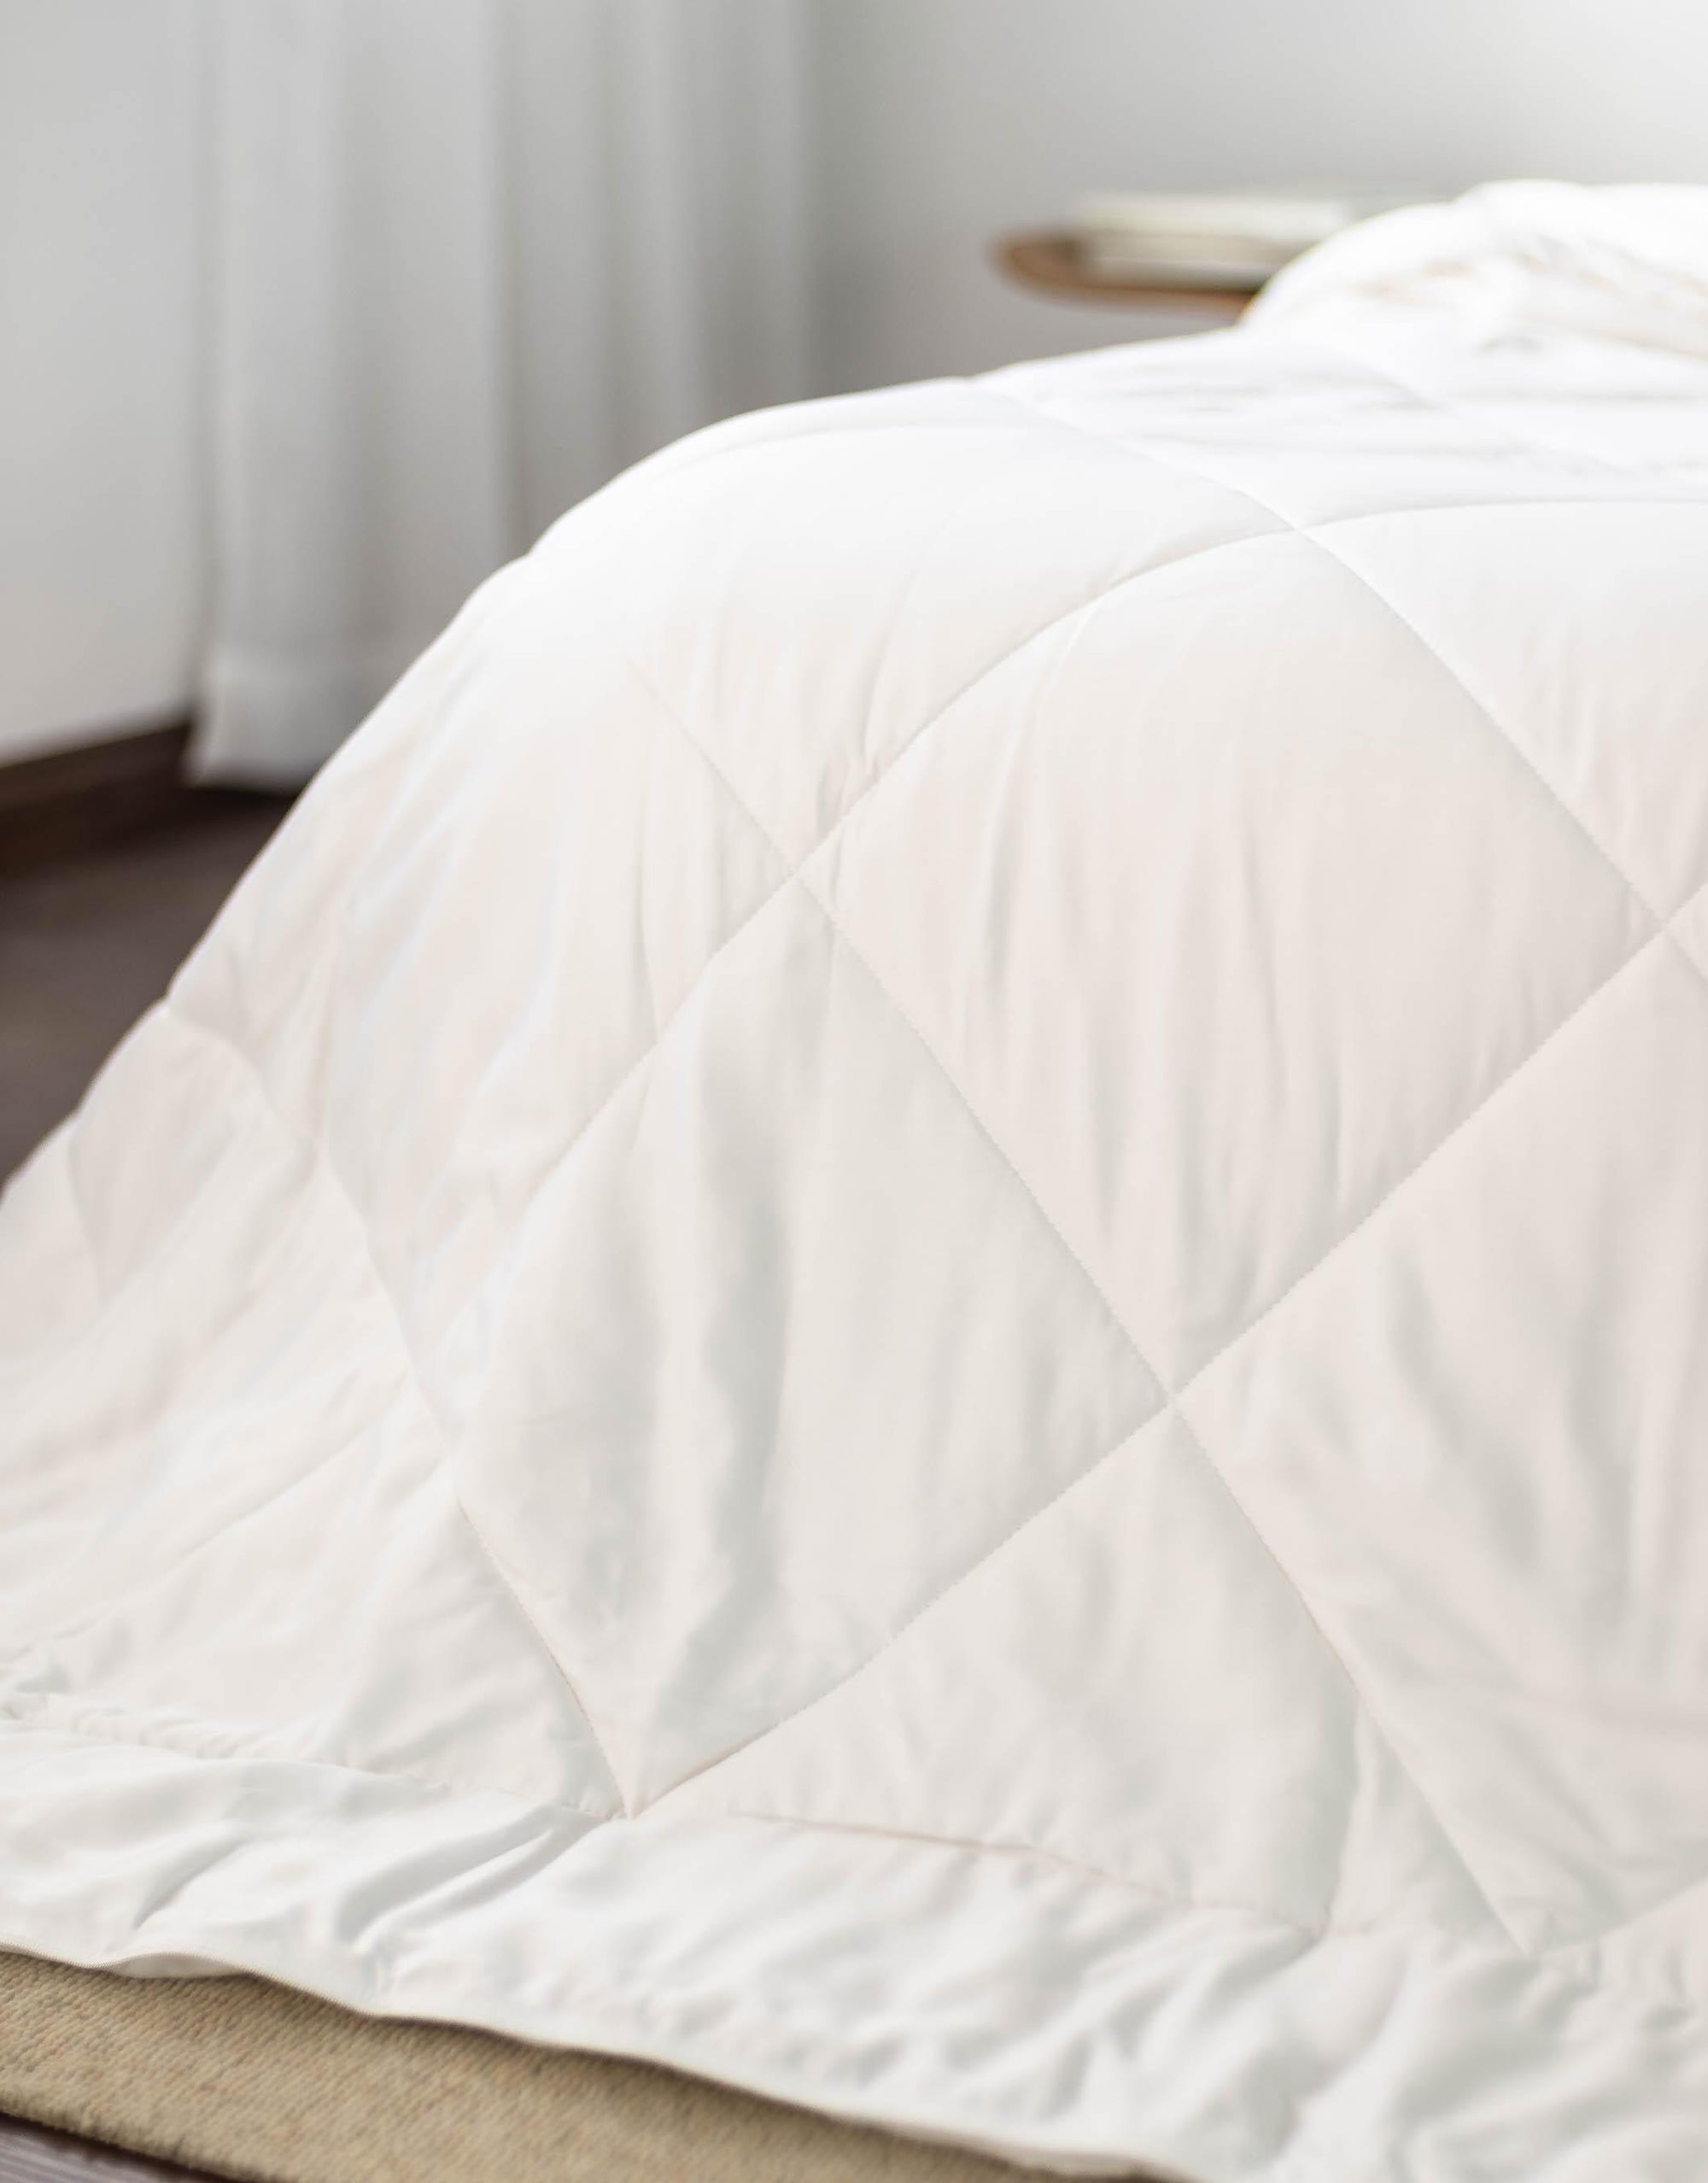 ava and ava philippines organic bamboo comforter / duvet filler infill. soft, thermoregulating and breathable. organic bamboo inside and out. the softest comforter you'll ever sleep with.